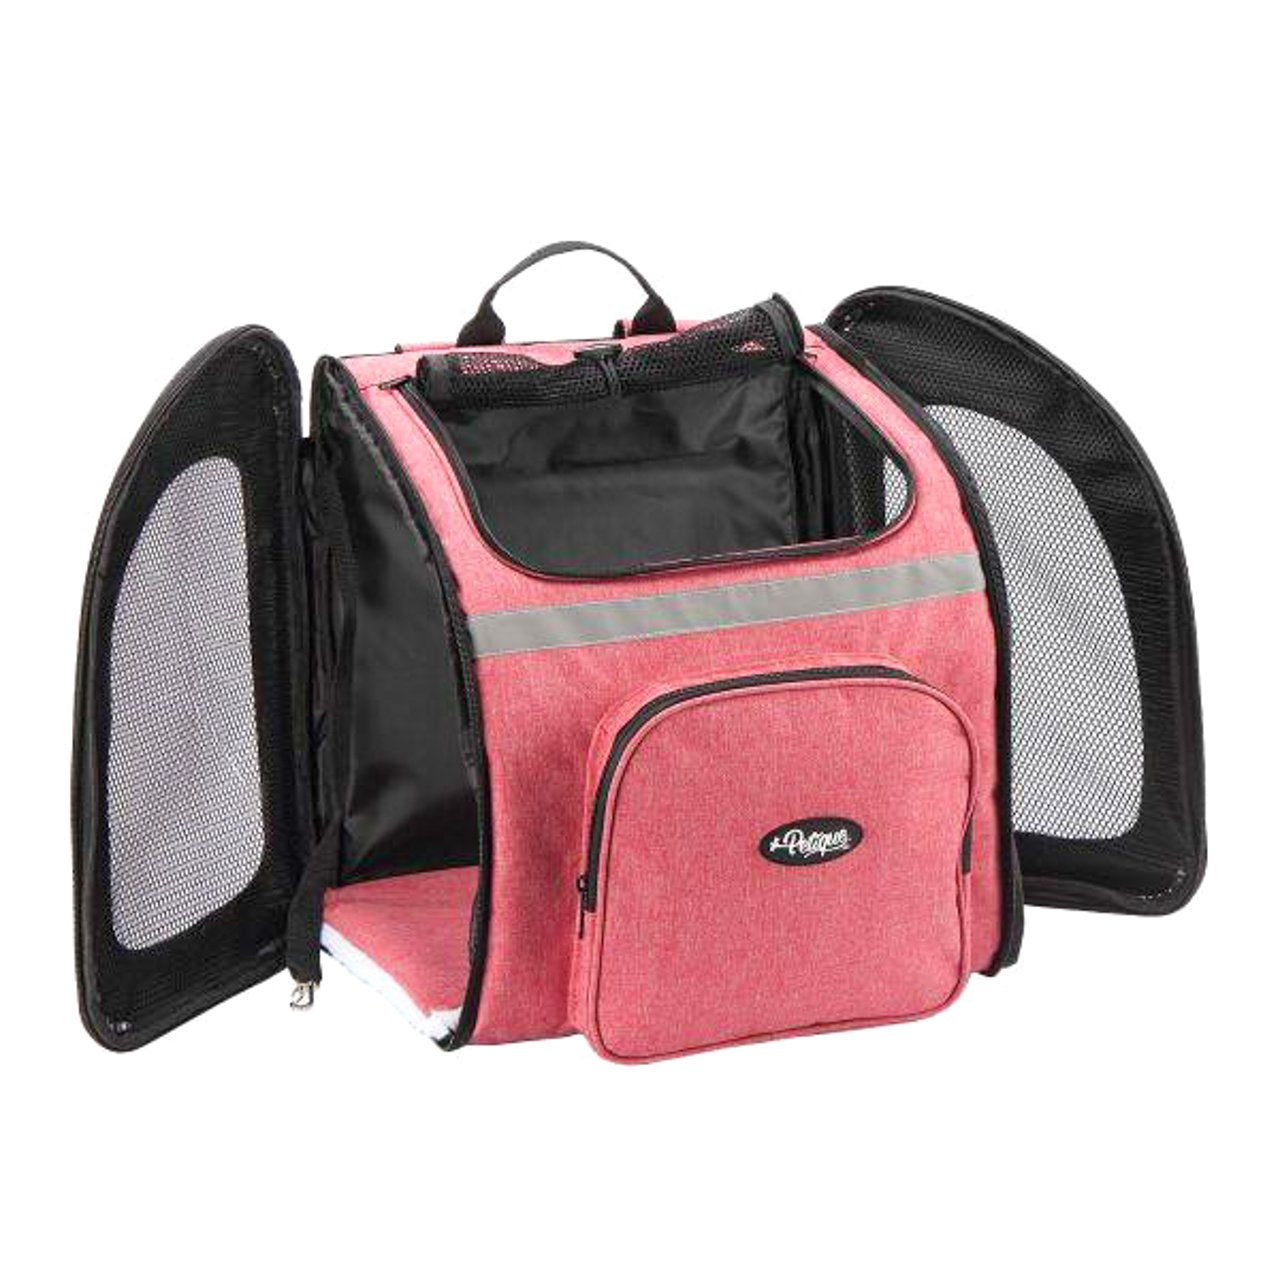 Pet Travel Bags Market Size, Trends, Global Growth Report, 2030